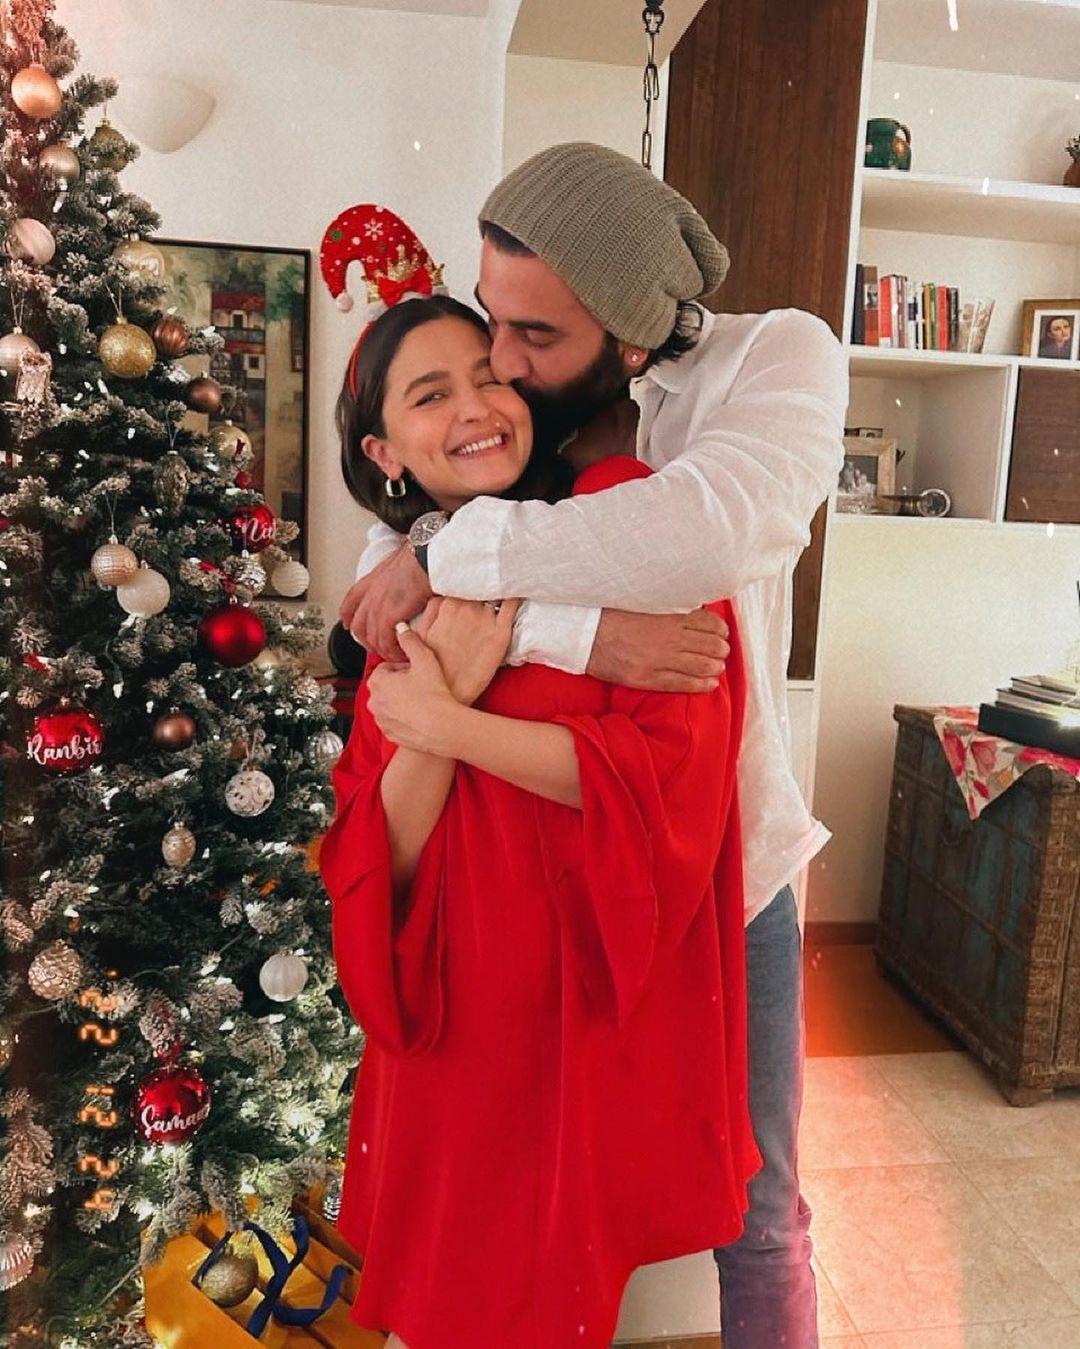 In one of the pictures, actor Ranbir Kapoor could be seen giving a warm back hug to his wife Alia and kissing her on her cheeks as she can't stop smiling. In the picture, Alia donned a red top with a Santa hat whereas the 'Besharam' actor opted for a white shirt with an olive green beanie cap